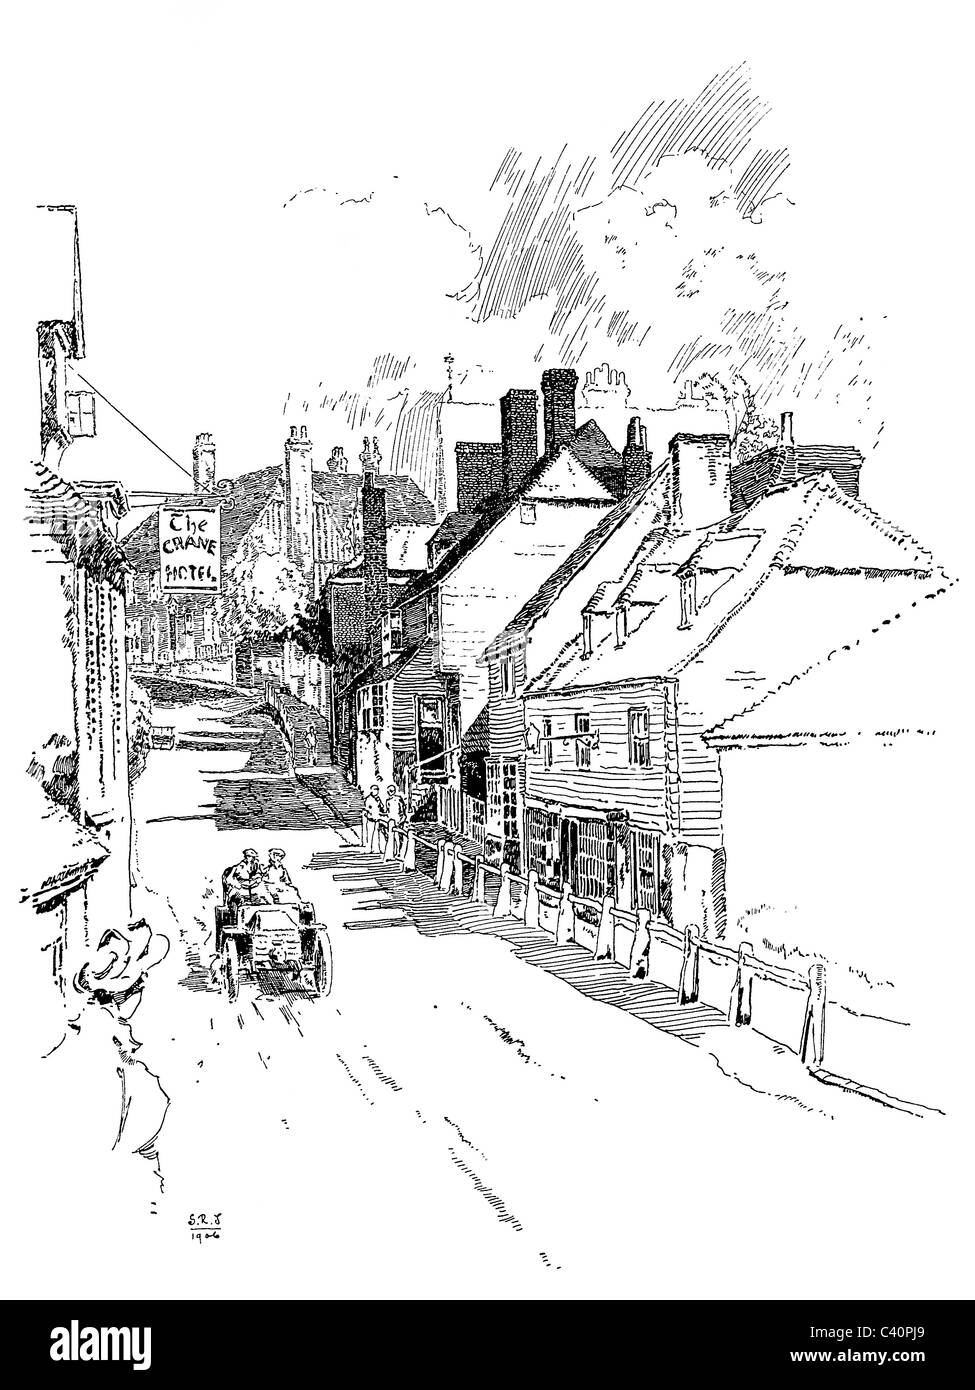 Cranbrook, Kent - pen and ink illustration from 'Old English Country Cottages' by Charles Holme, 1906. Stock Photo